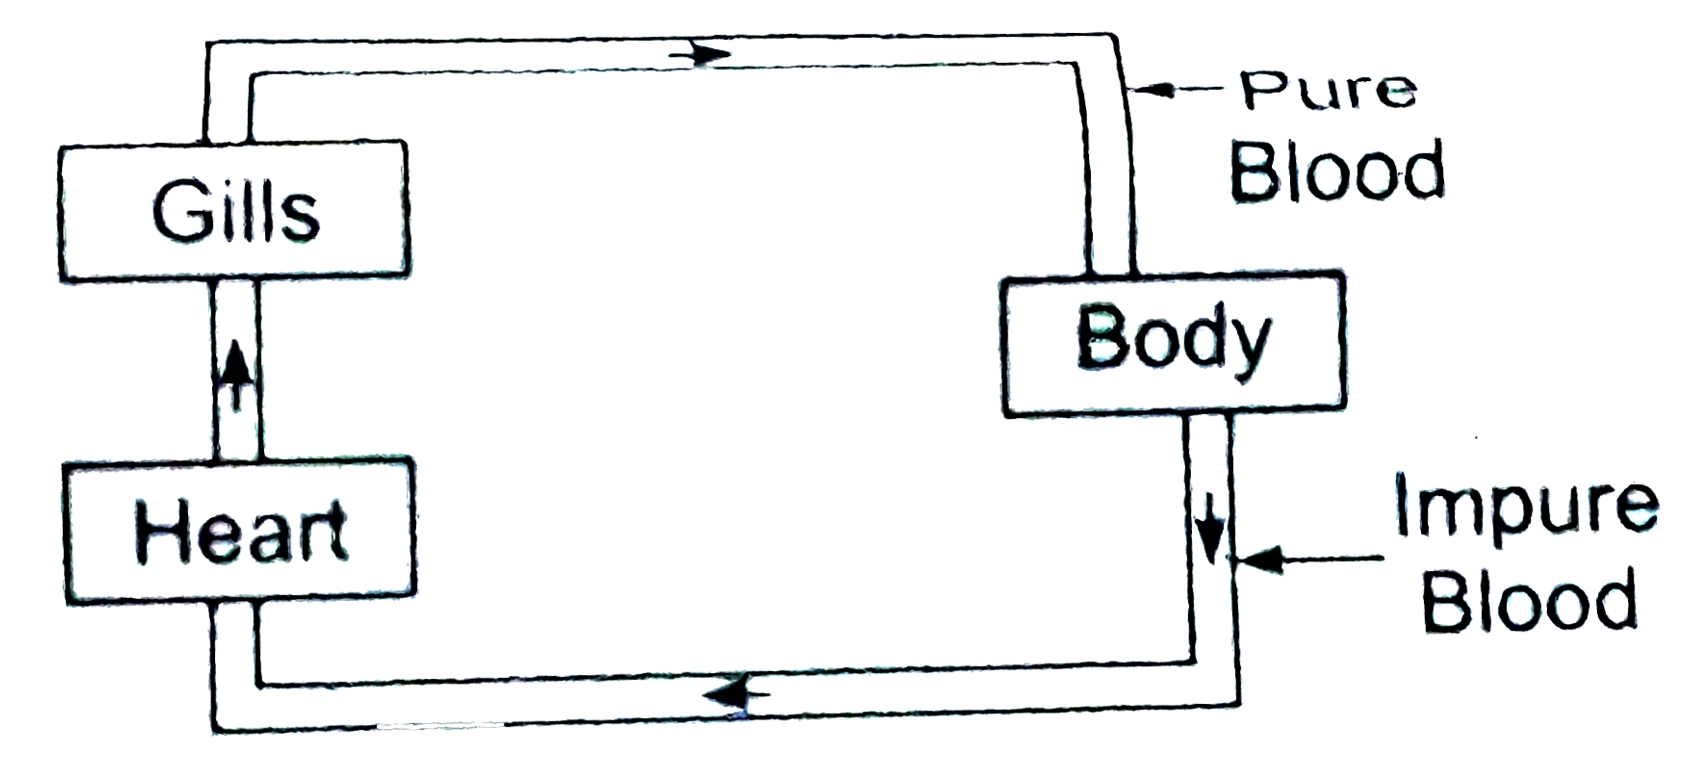 The given diagram represents circulation in